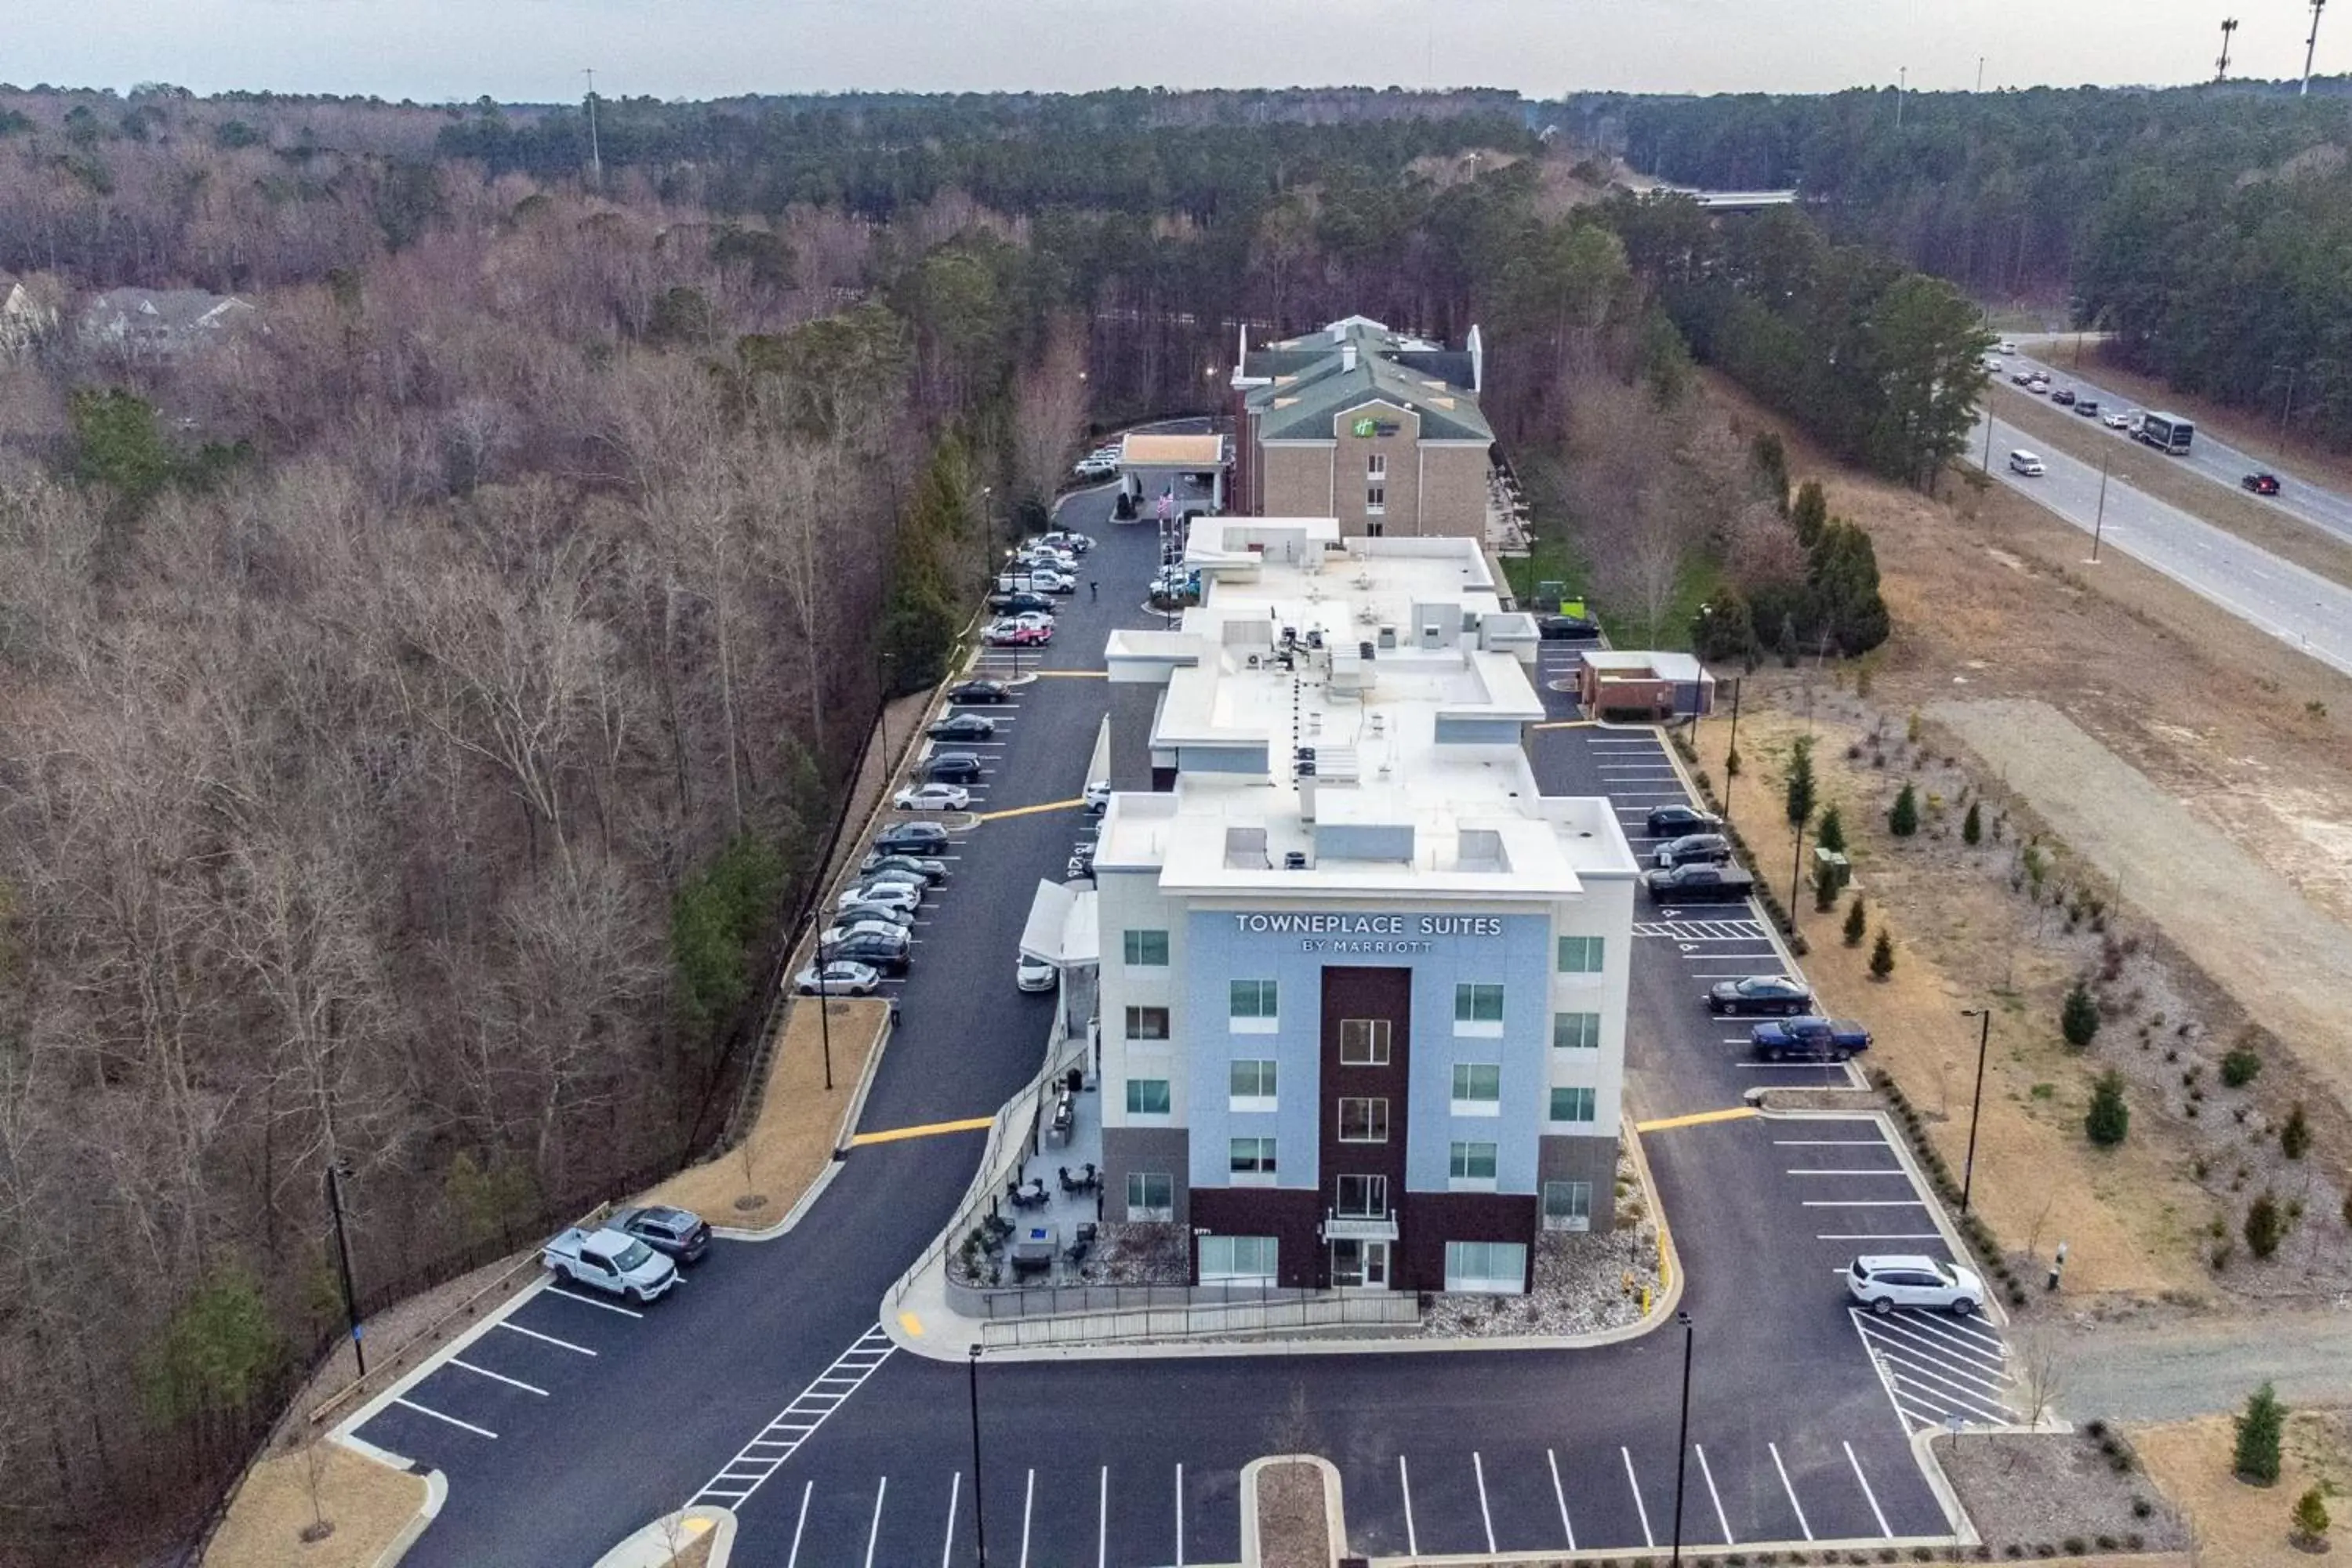 Property building, Bird's-eye View in TownePlace Suites by Marriott Raleigh - University Area